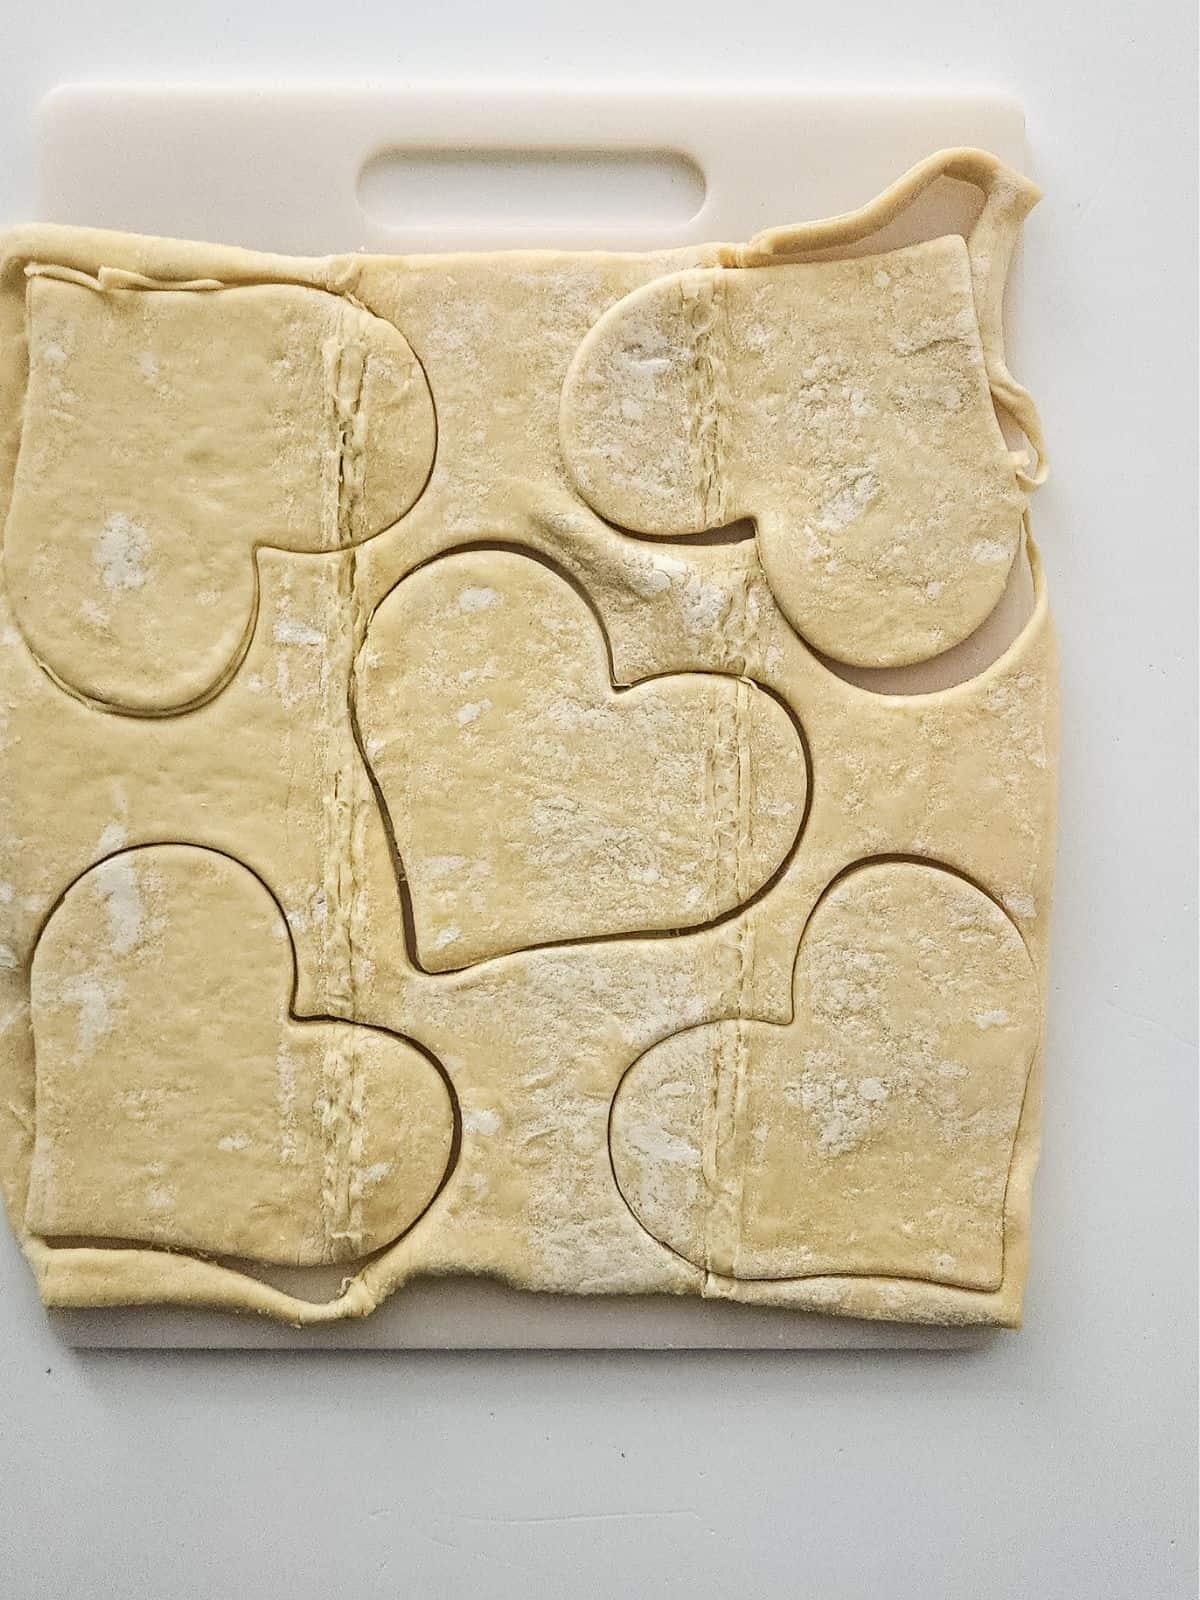 heart shapes in puff pastry.